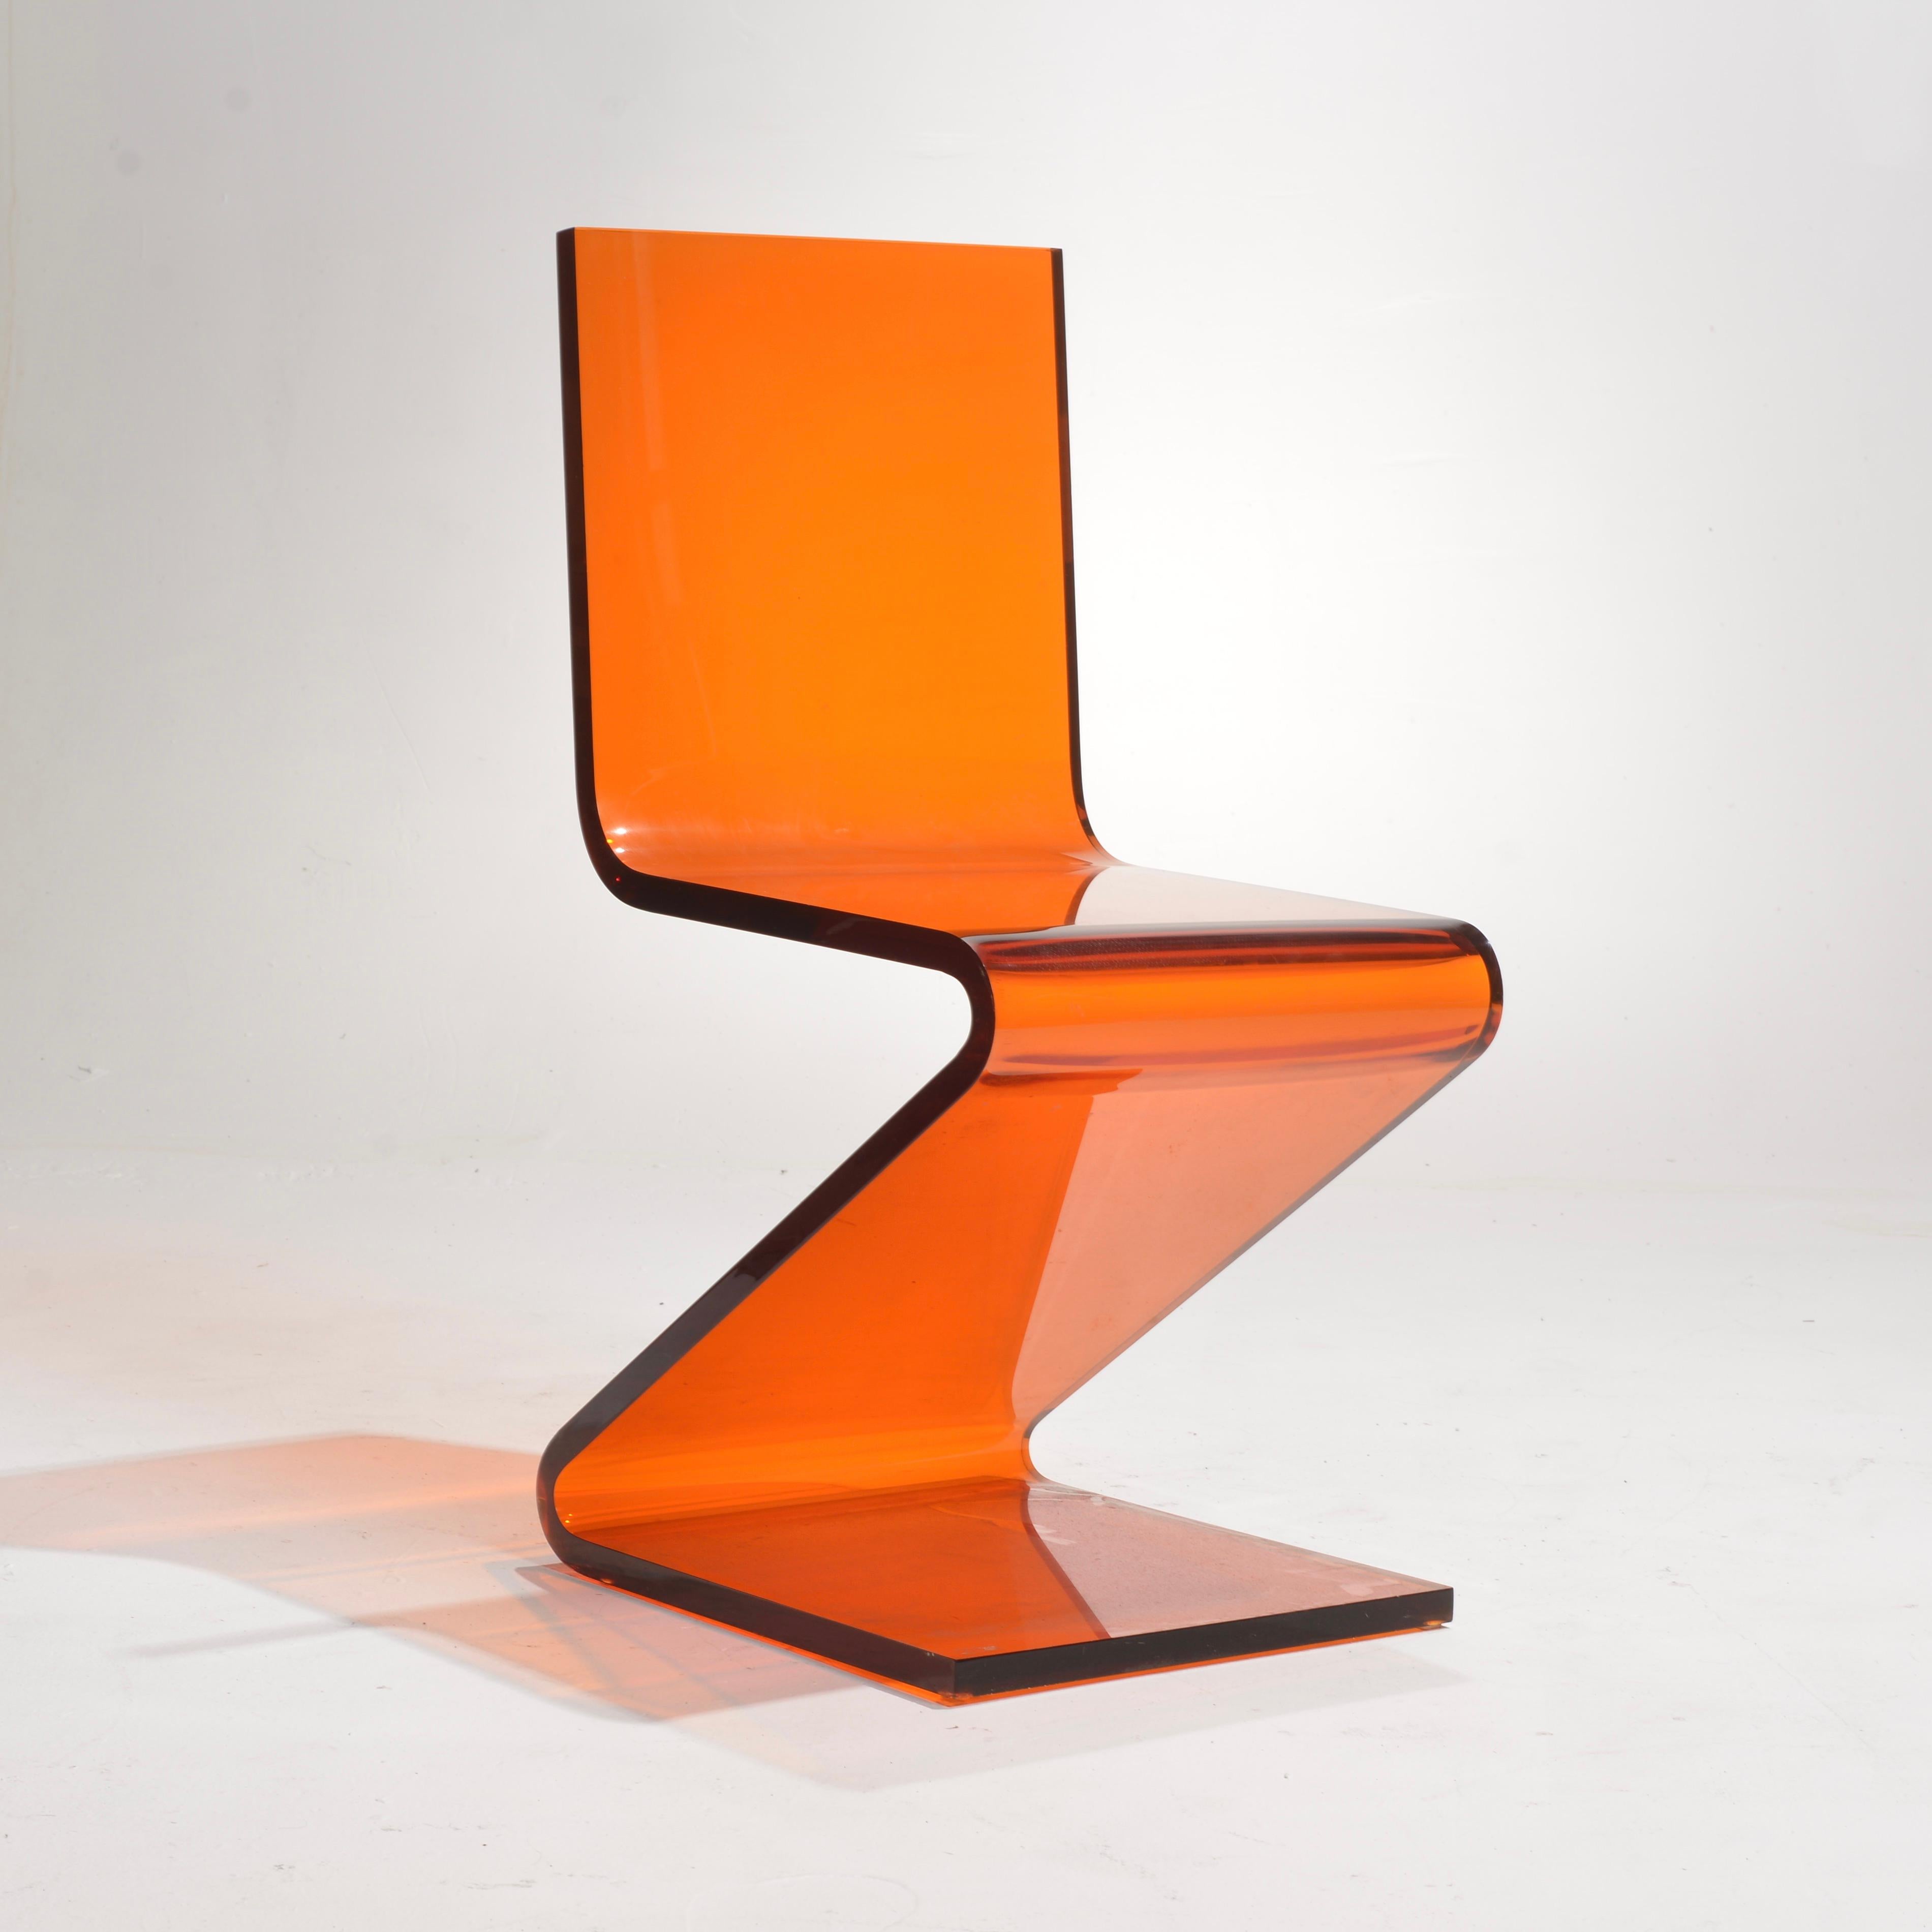 Vintage Lucite Z Table and Z Chairs by Shlomi Haziza for H Studio For Sale 12